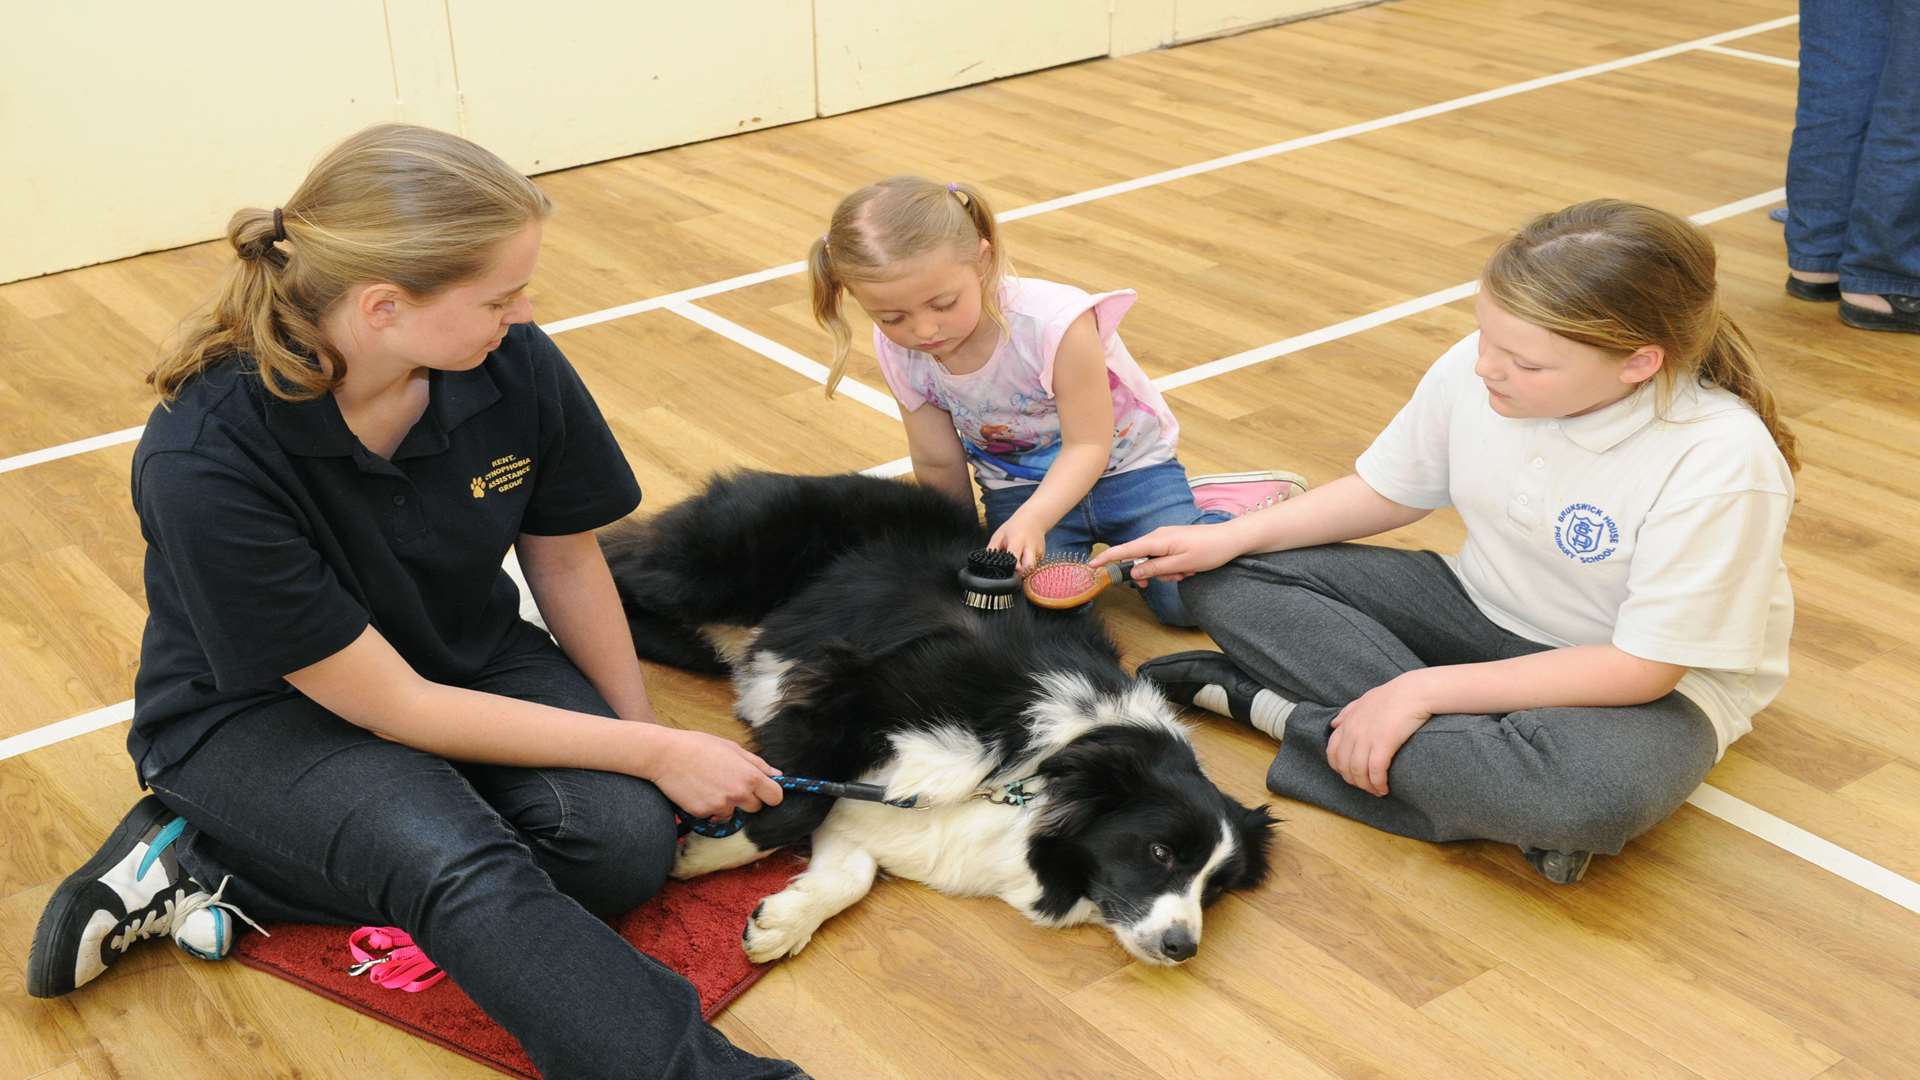 Alex Tourret with her border collie Nyx, who is being brushed by Daisy Tandy 4, and Rachel Zigler, 9. Picture: Simon Hildrew